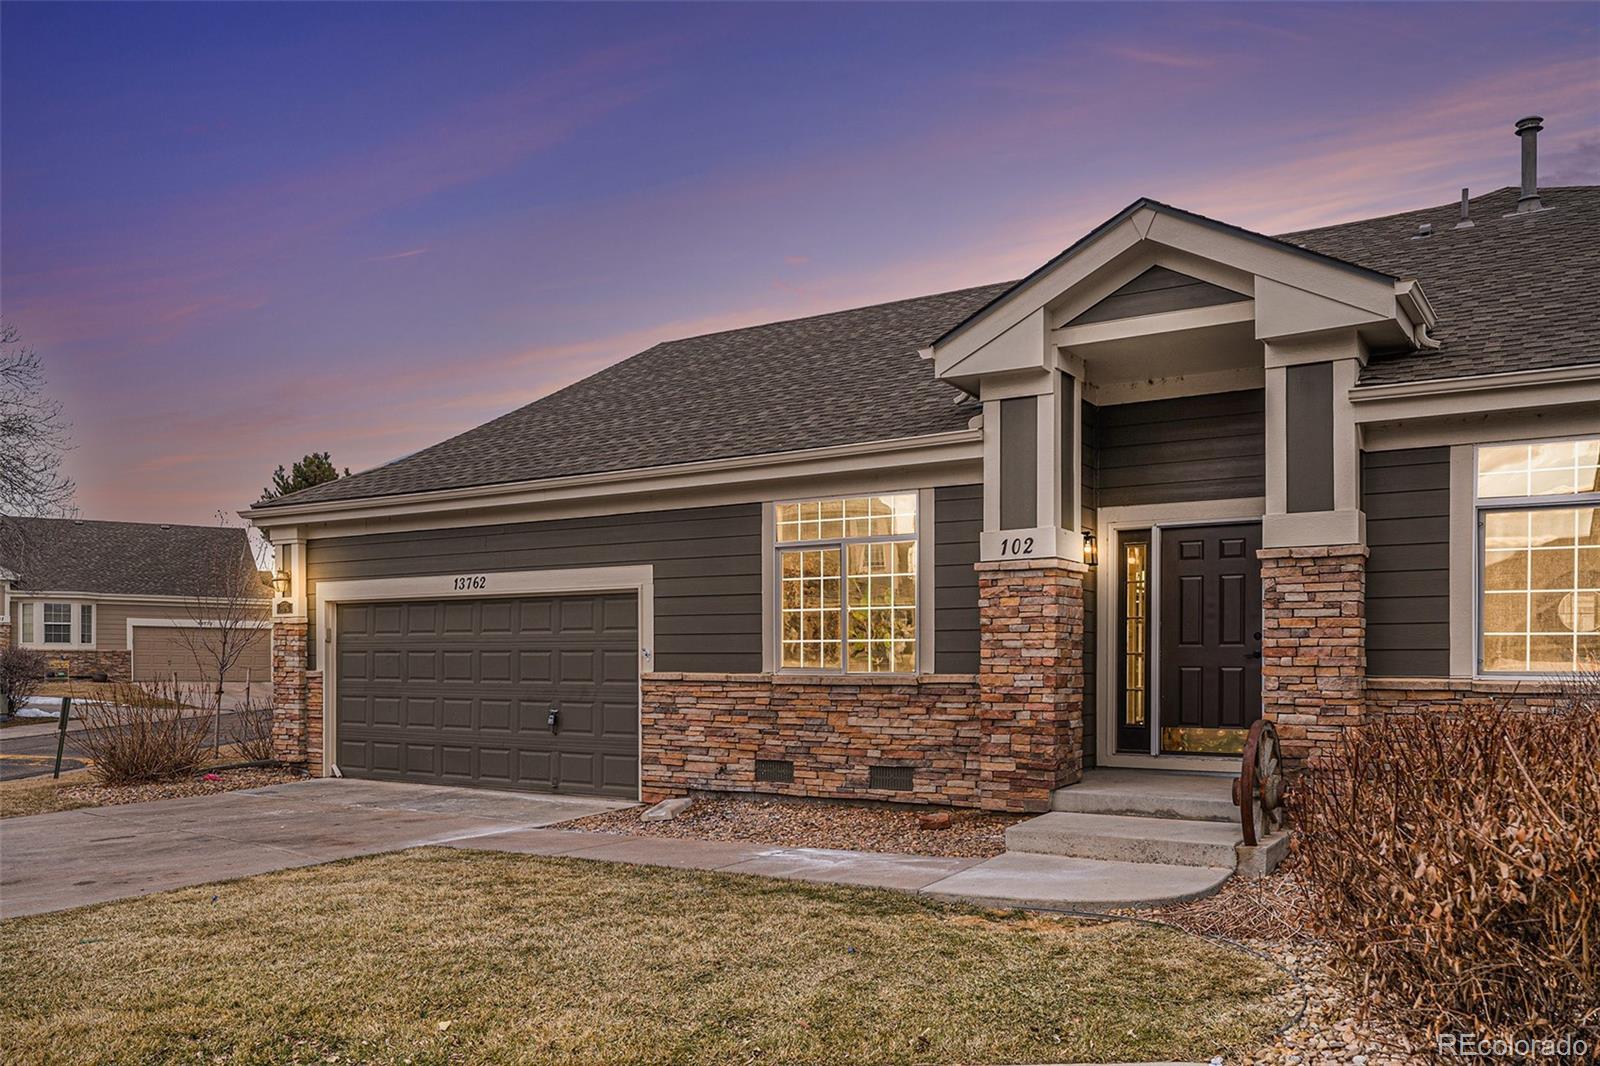 13762  legend way, Broomfield sold home. Closed on 2024-03-15 for $675,000.